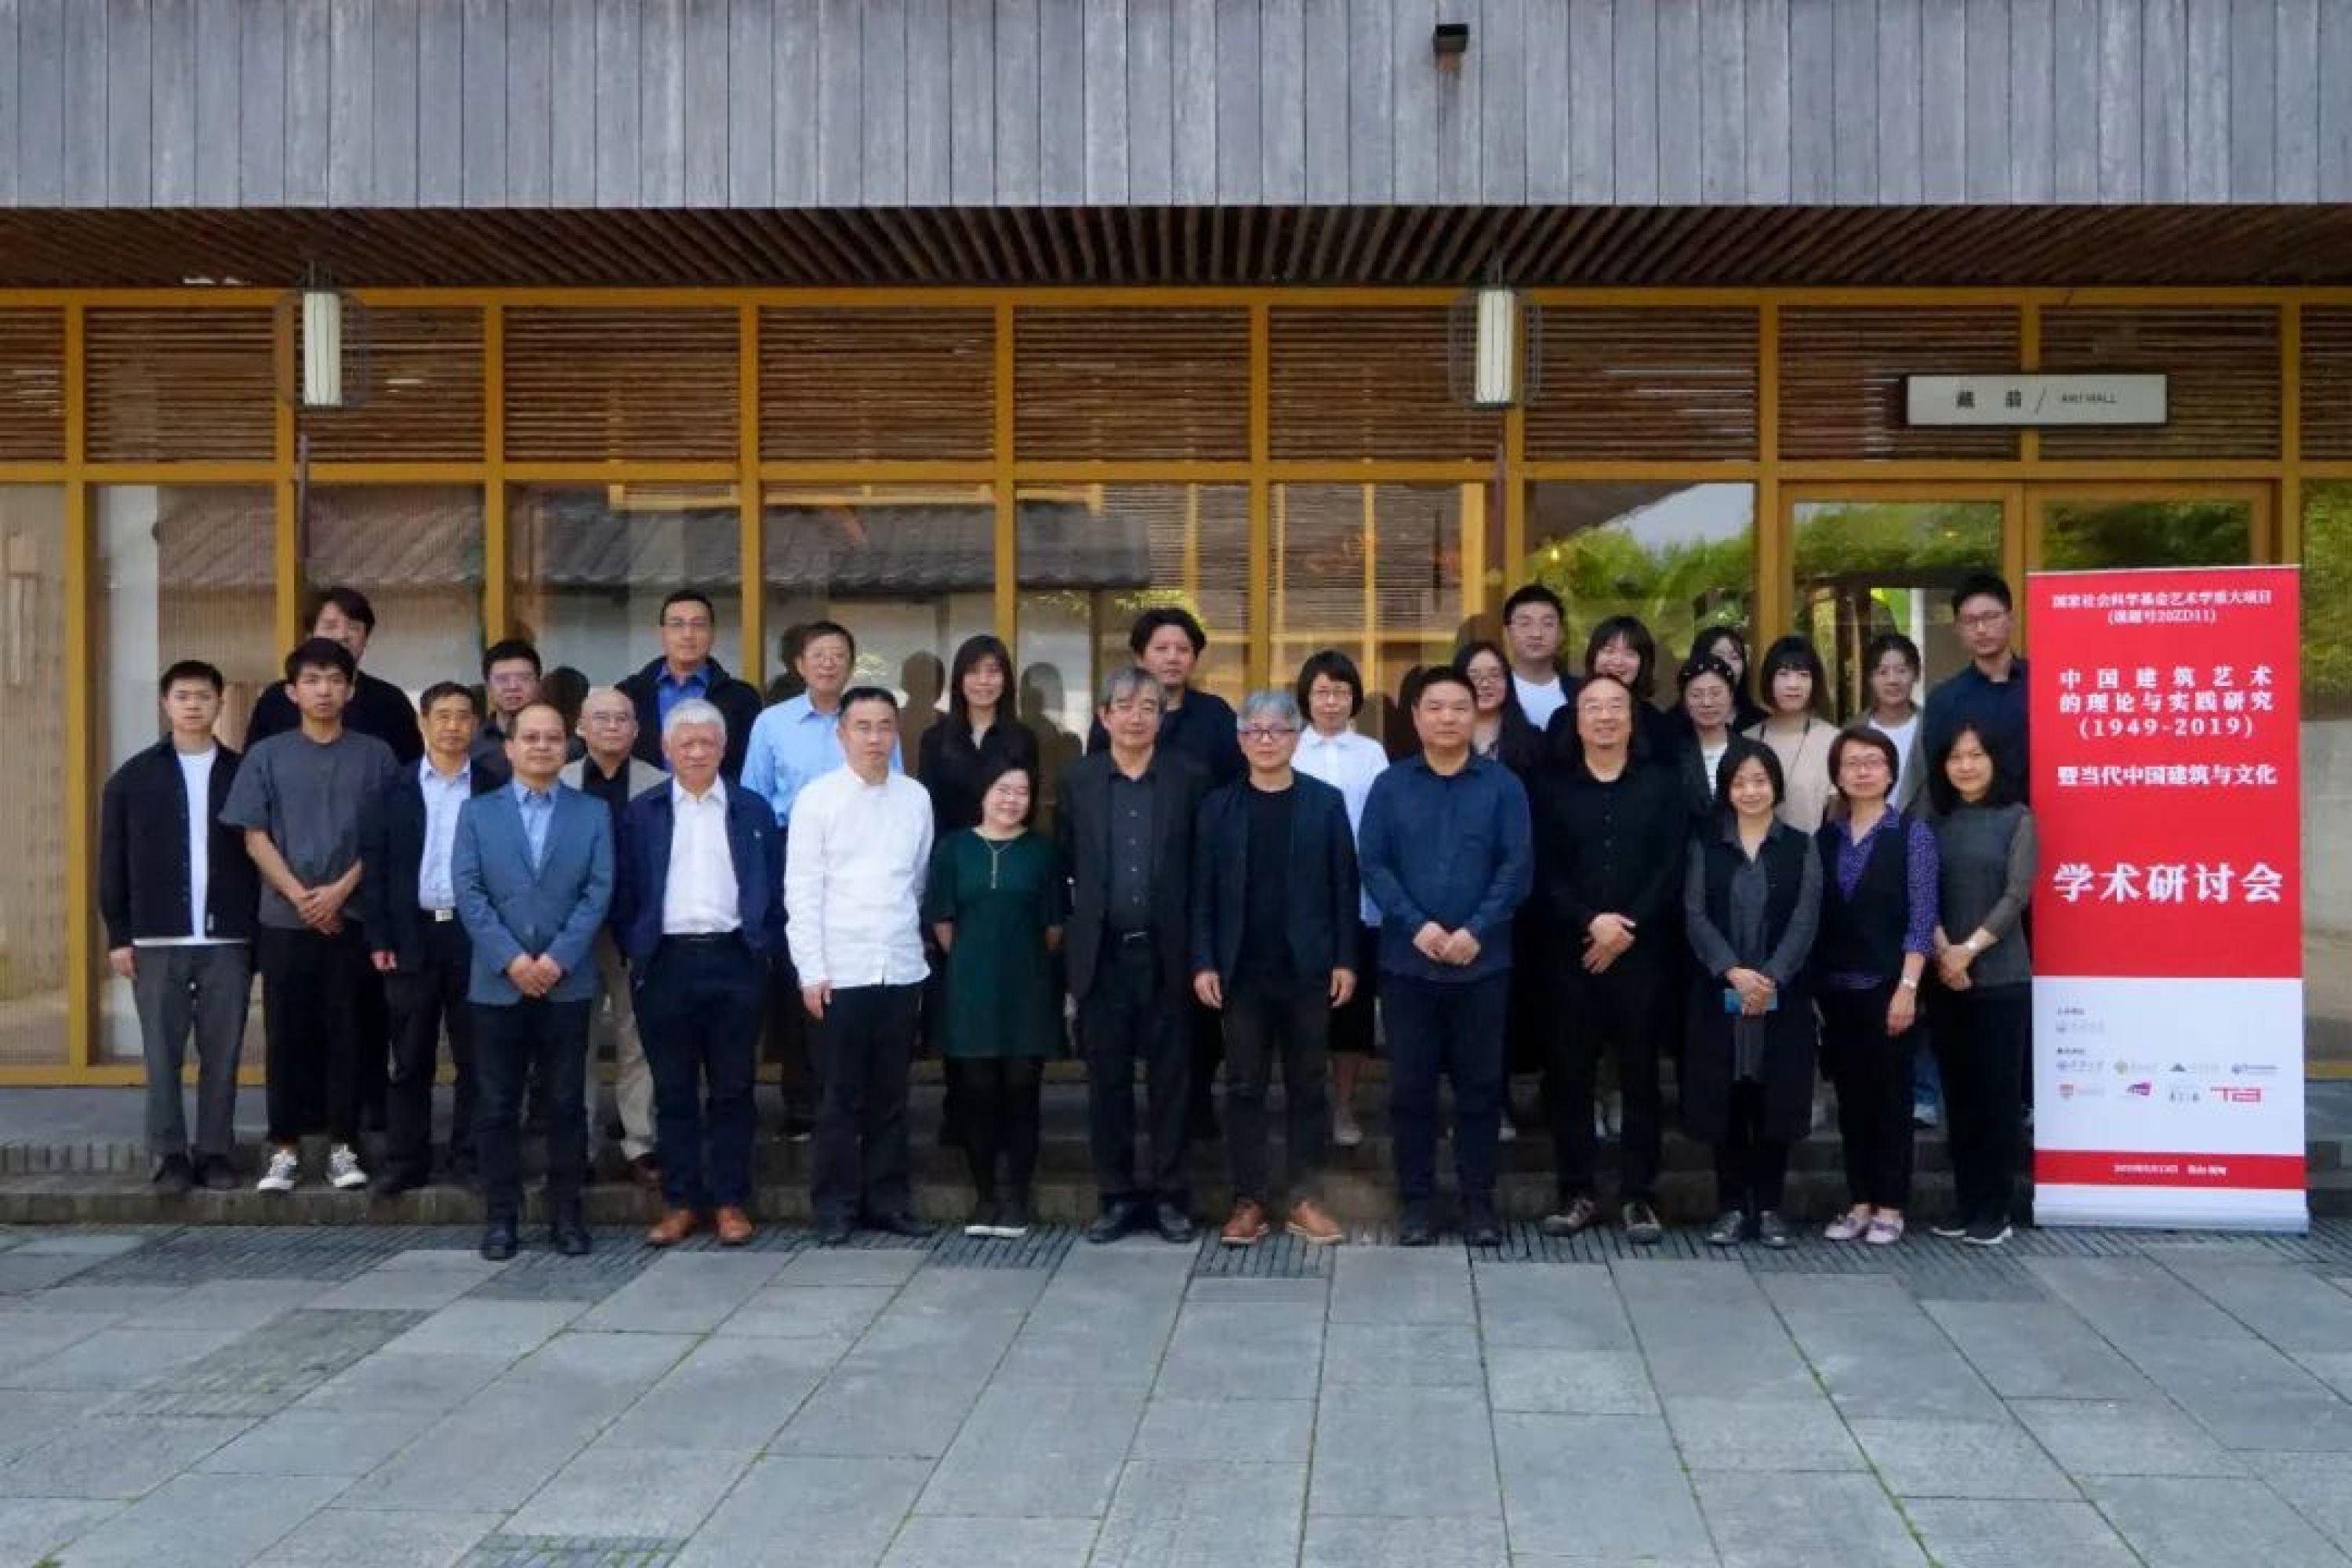 Zigeng Wang was Invited to Participate in the National Social Science Foundation's Major Project in the Field of Art, “Theoretical and Practical Research on Chinese Architectural Art," and the Academic Seminar on Contemporary Chinese Architecture and Culture